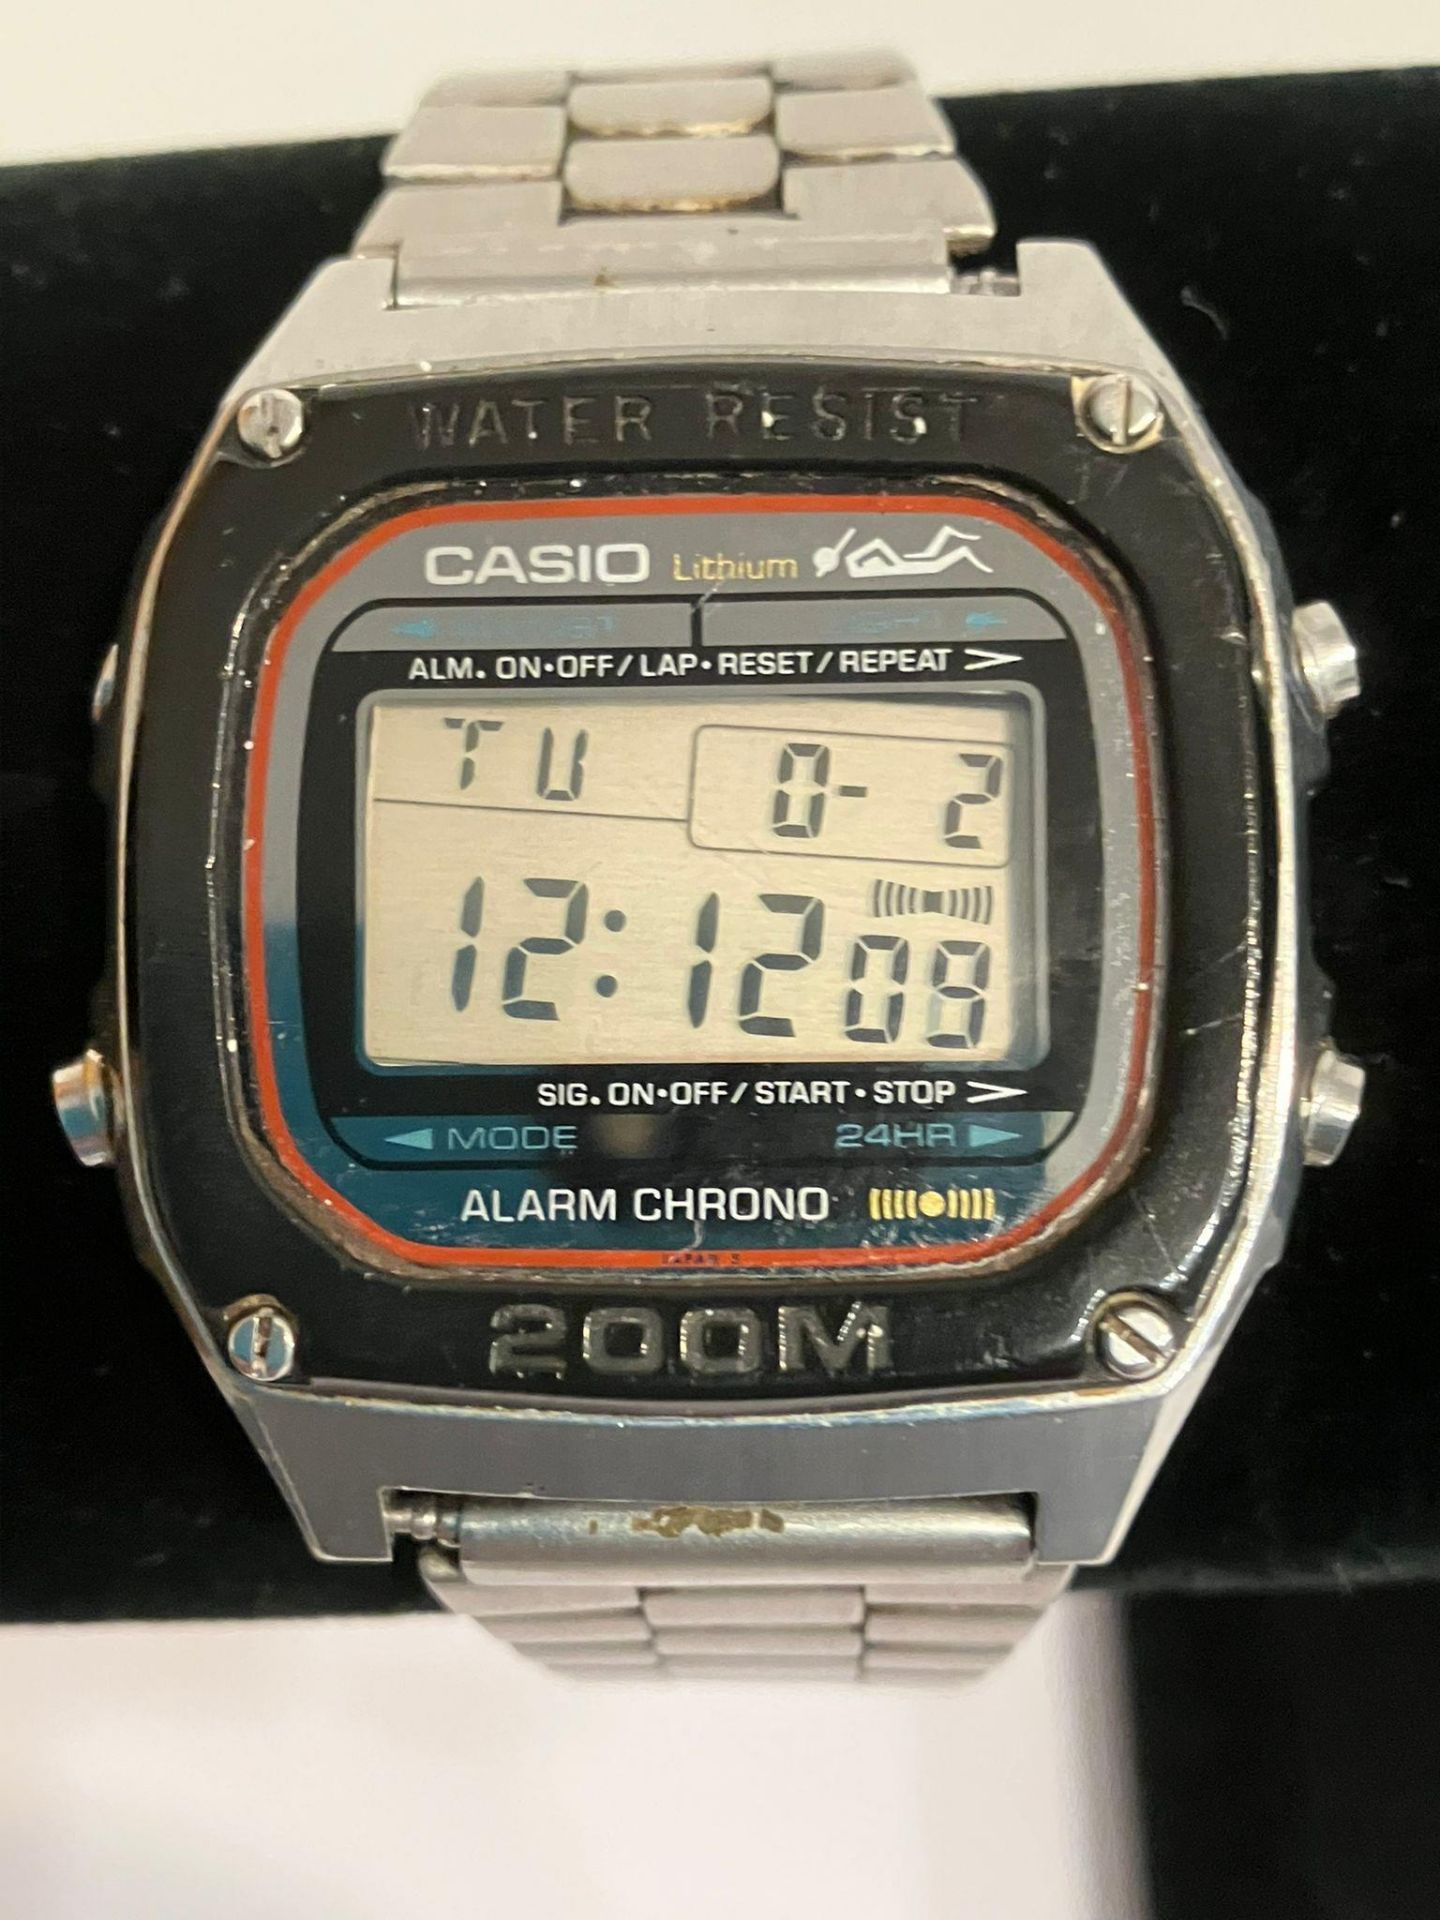 Vintage Digital CASIO 280 DW1000 Multi function wristwatch. Finished in stainless steel with